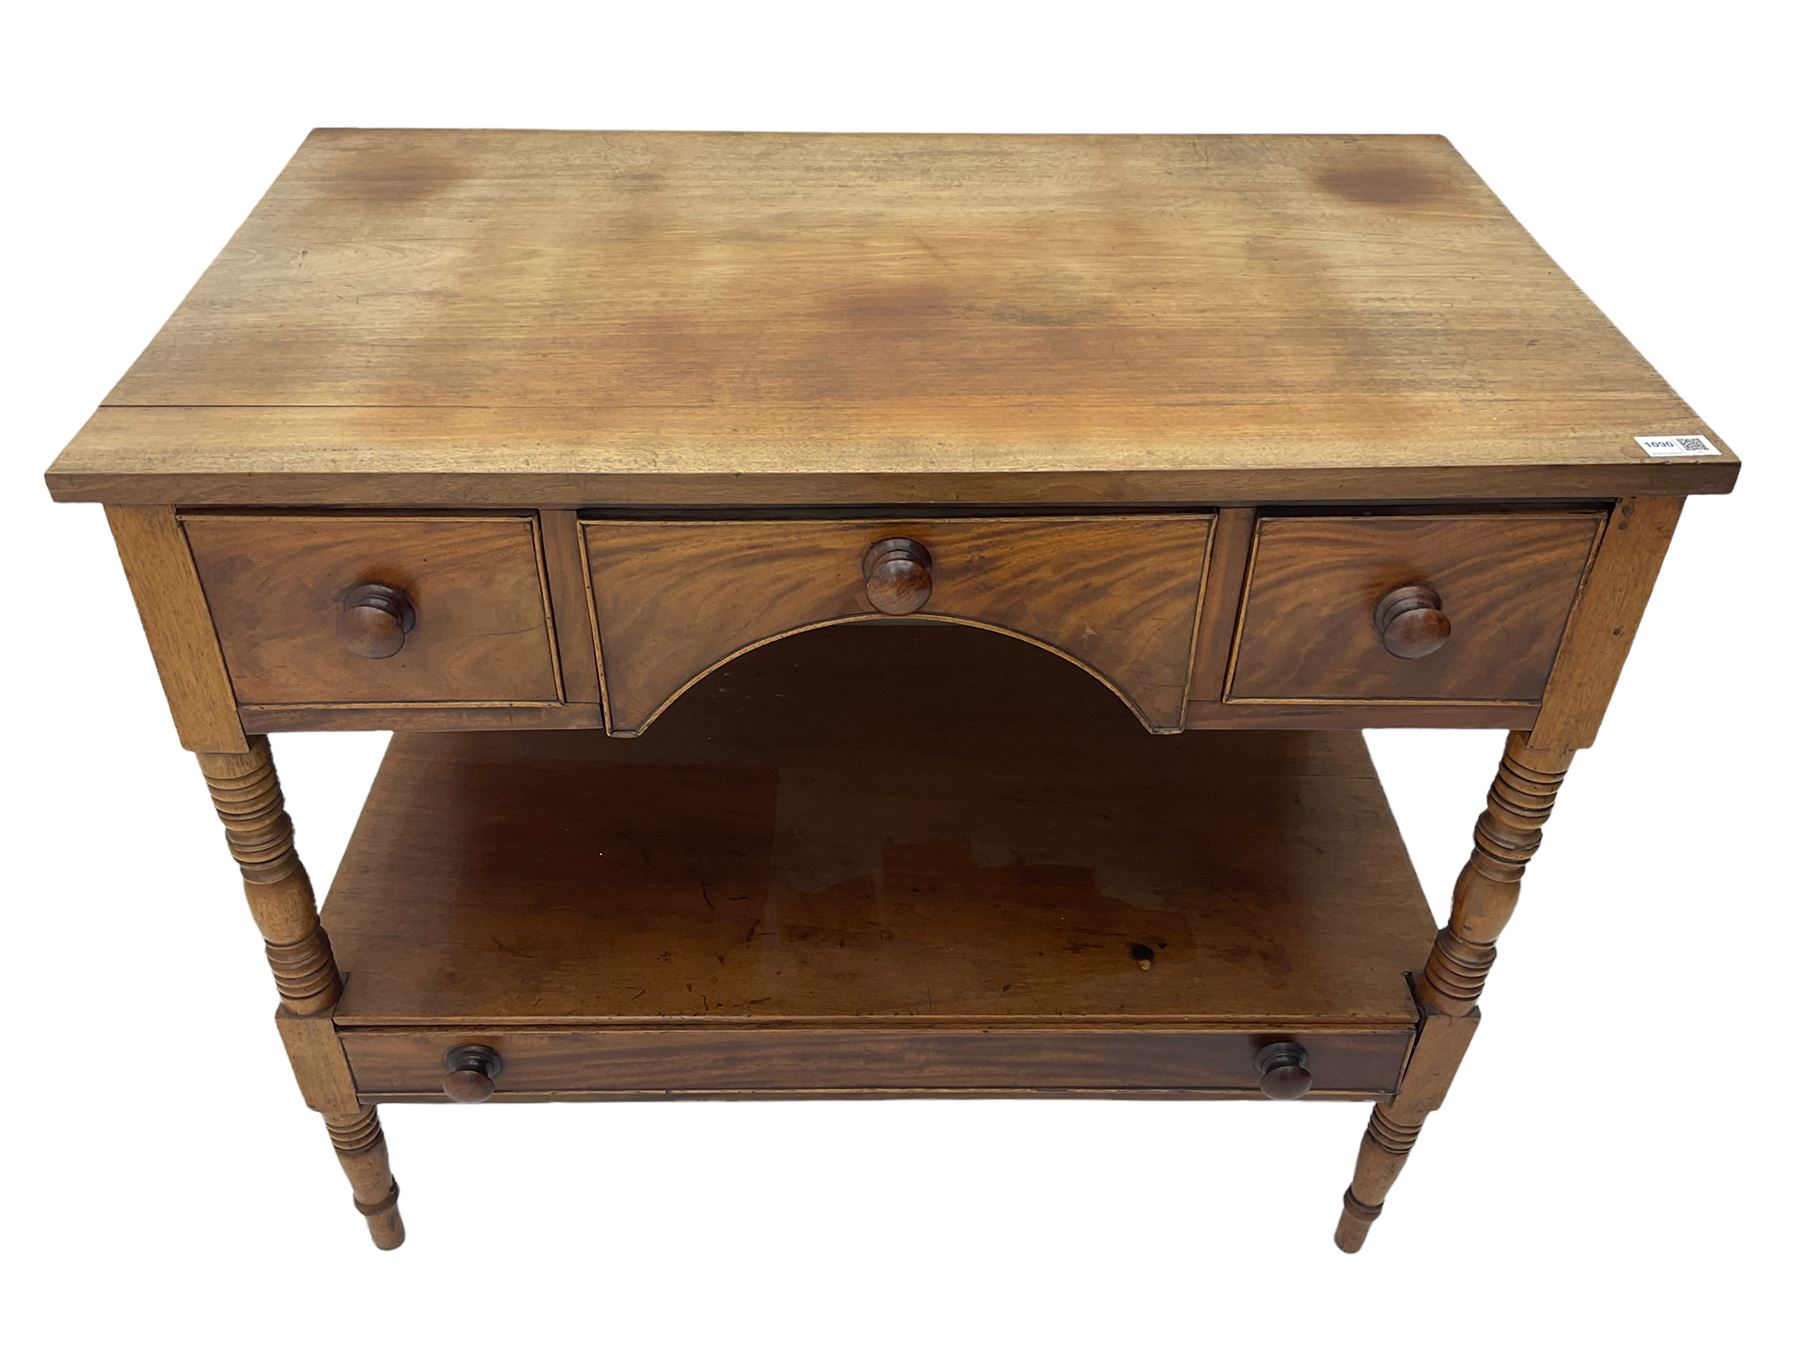 Early 19th century mahogany two tier washstand - Image 2 of 8